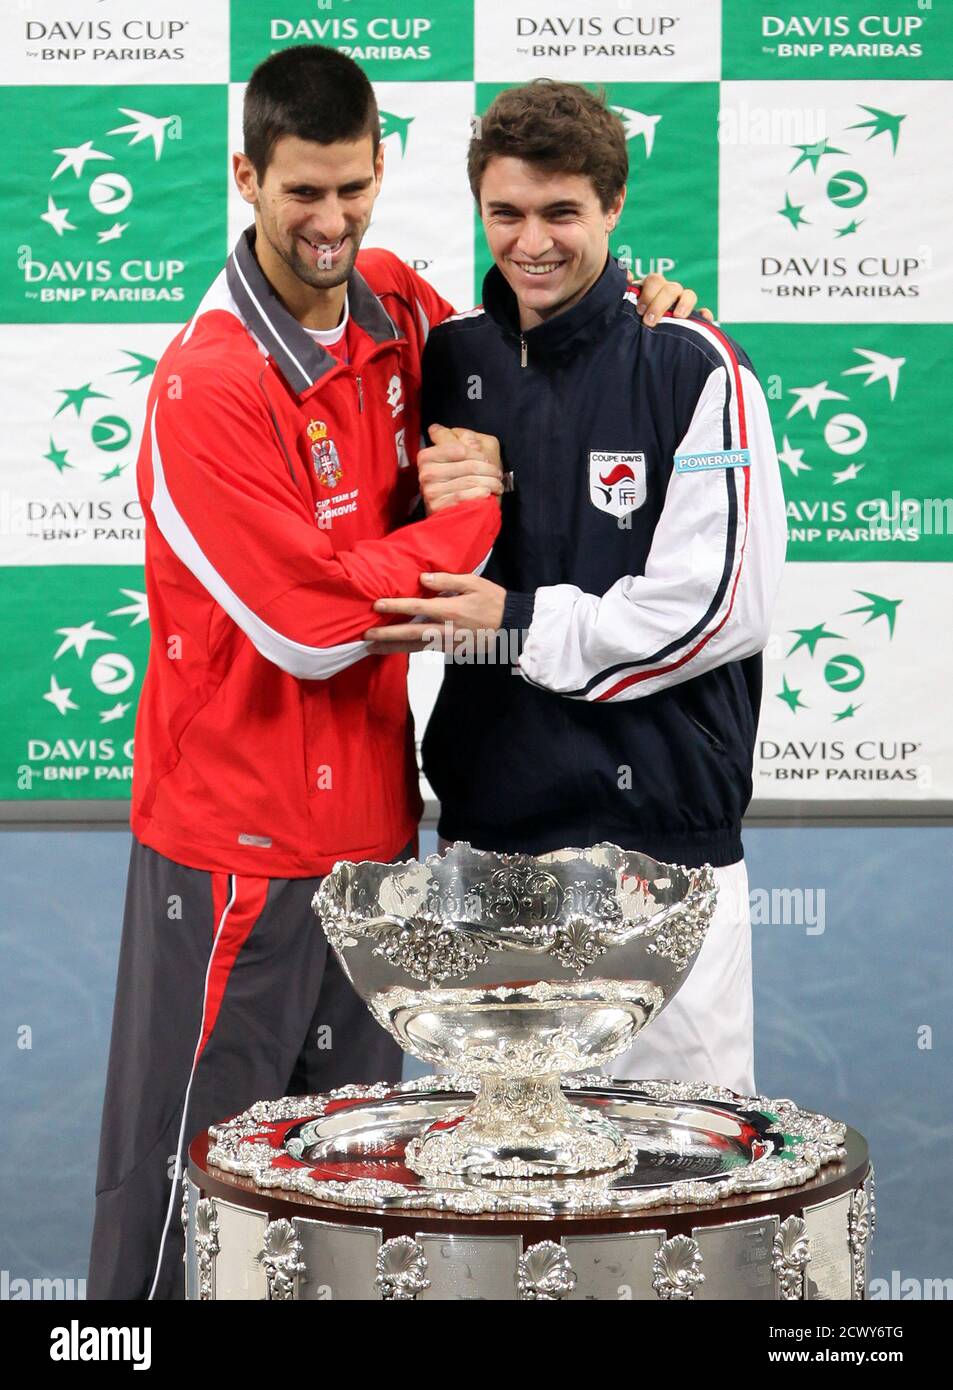 Serbia's Novak Djokovic (L) and France's Gilles Simon pose with the Davis Cup trophy after the official draw at Belgrade Arena in Belgrade December 2, 2010. Serbia and France will play their Davis Cup final tennis match from December 3-5 in Belgrade. REUTERS/Marko Djurica (SERBIA - Tags: SPORT TENNIS) Stock Photo